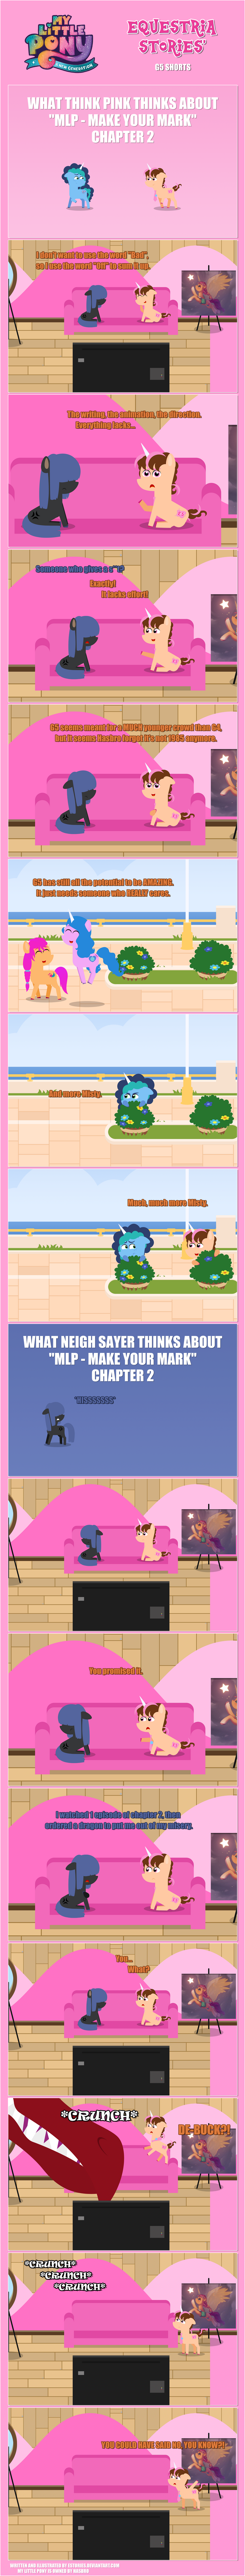 Page 22: ''OUR OPINION ABOUT MYM''